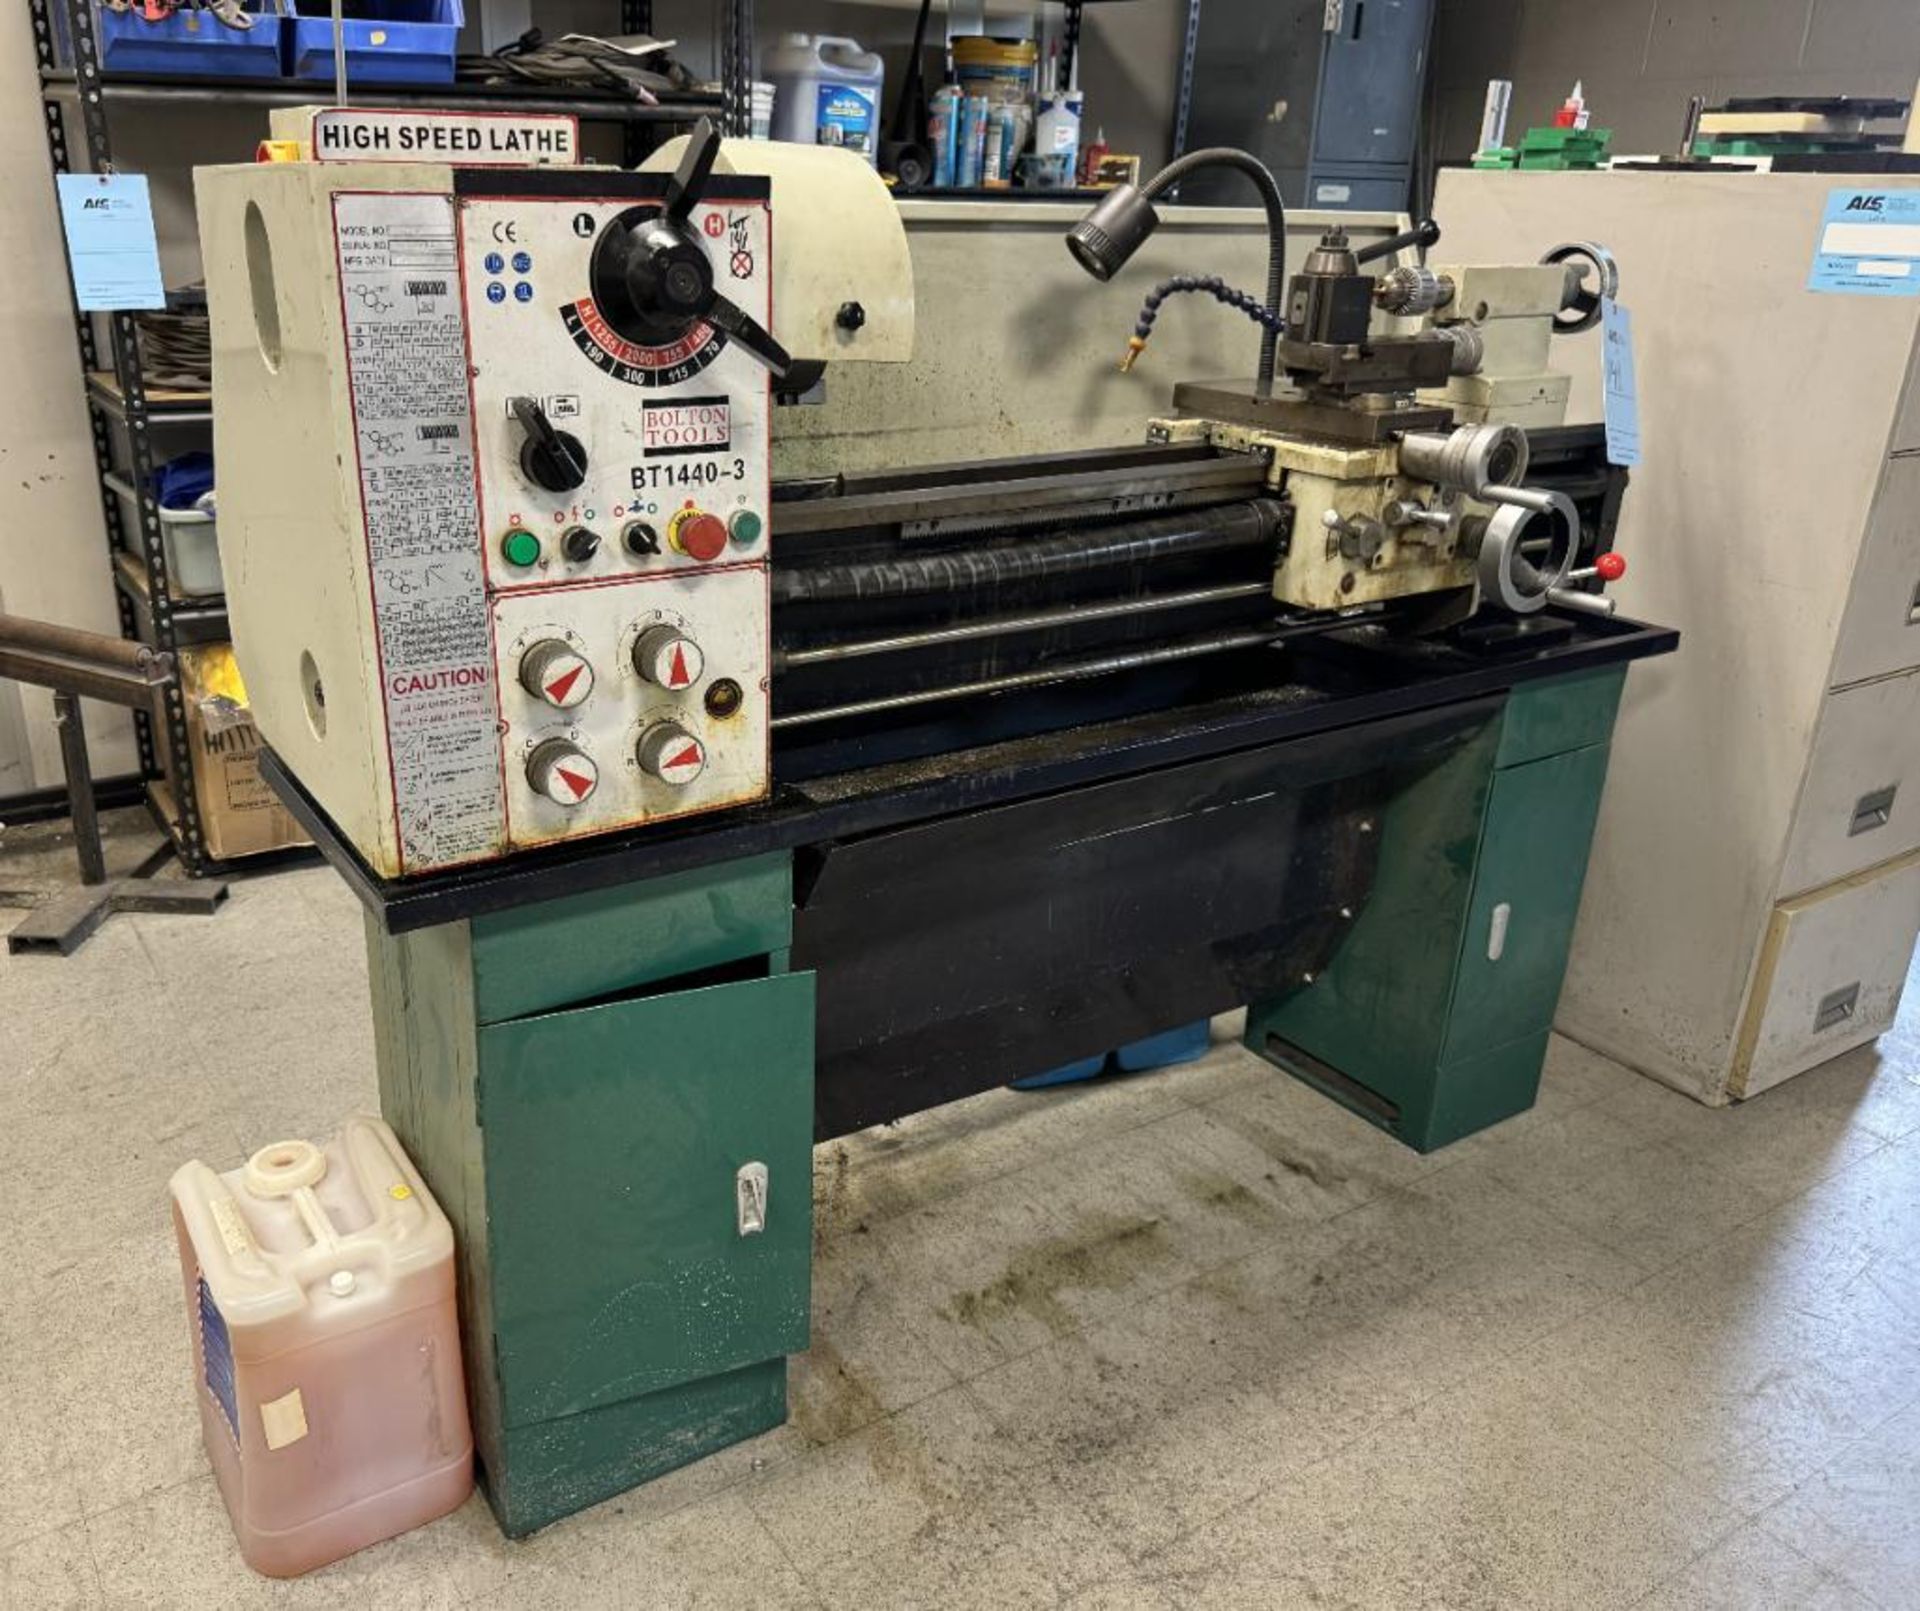 Bolton Tools 14" X 40" Metal Lathe, Model BT1440-3, Serial# 14600168, Built 2014. With misc. tooling - Image 2 of 15